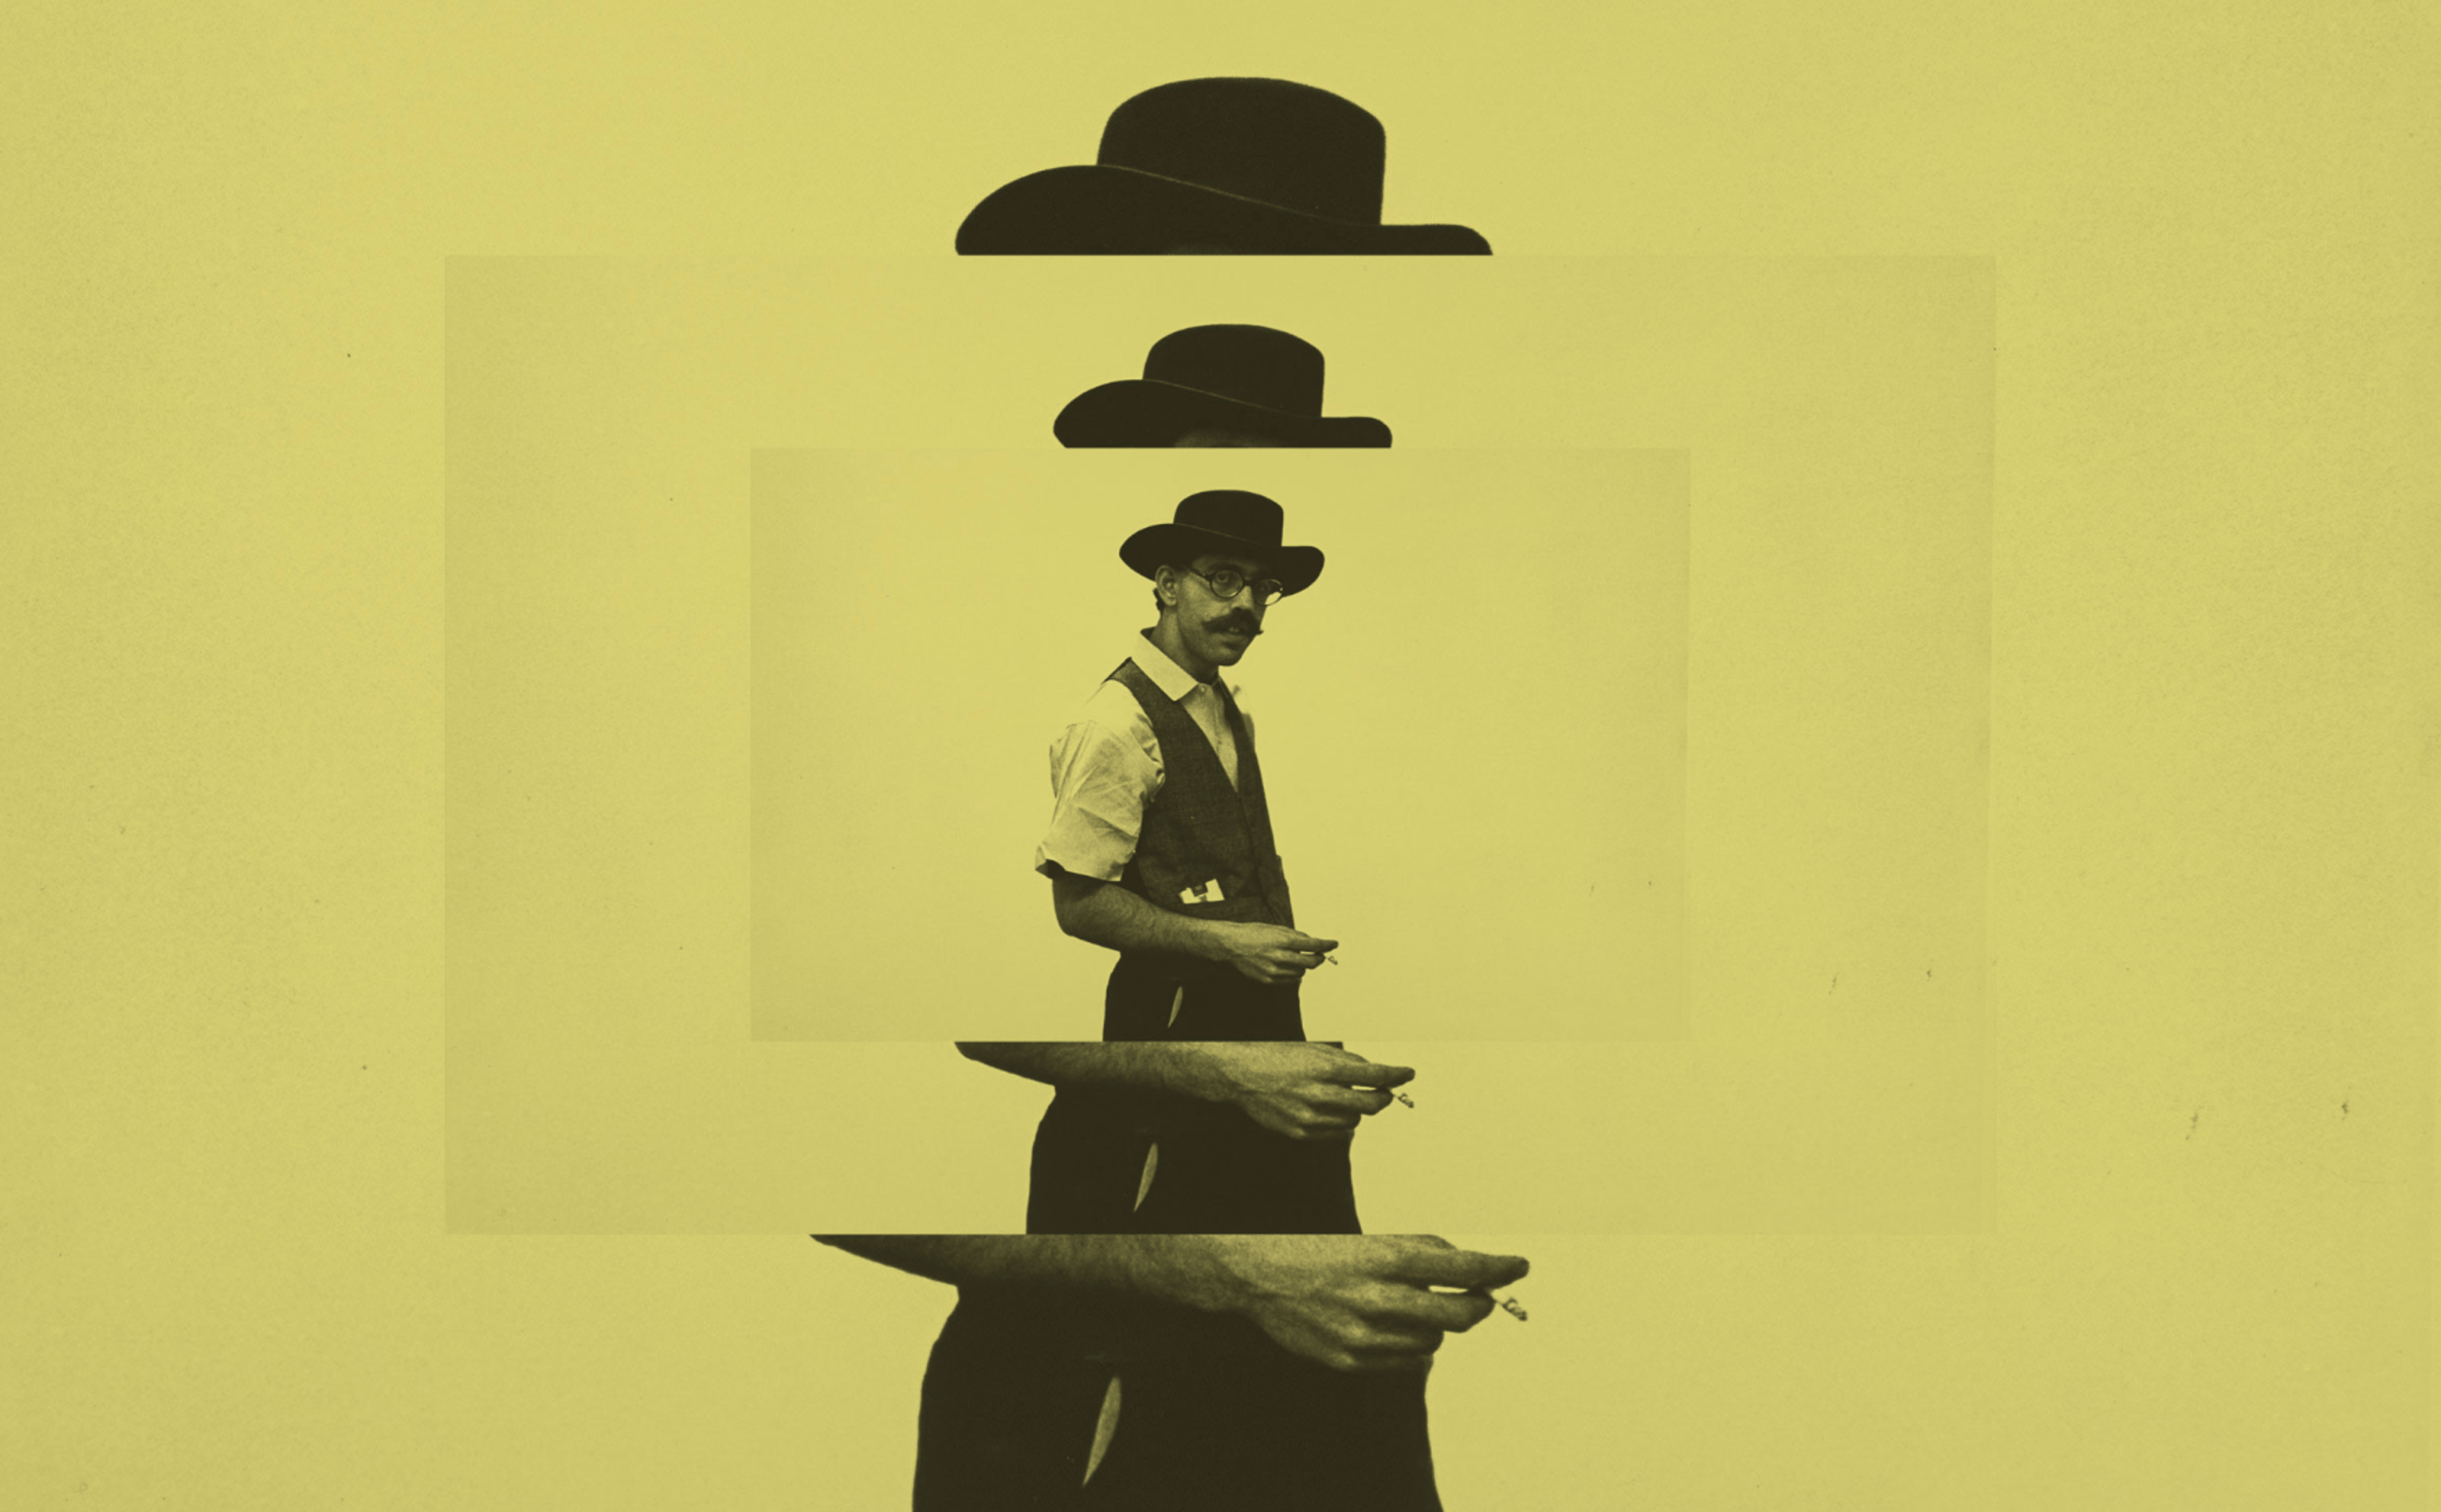 A man with glasses and a mustache in a black fedora, white short-sleeved shirt and black waistcoat and pants holding a cigarette in his right hand, stands in front of a yellow background. The repetitive pose is arranged in order from largest to smallest.